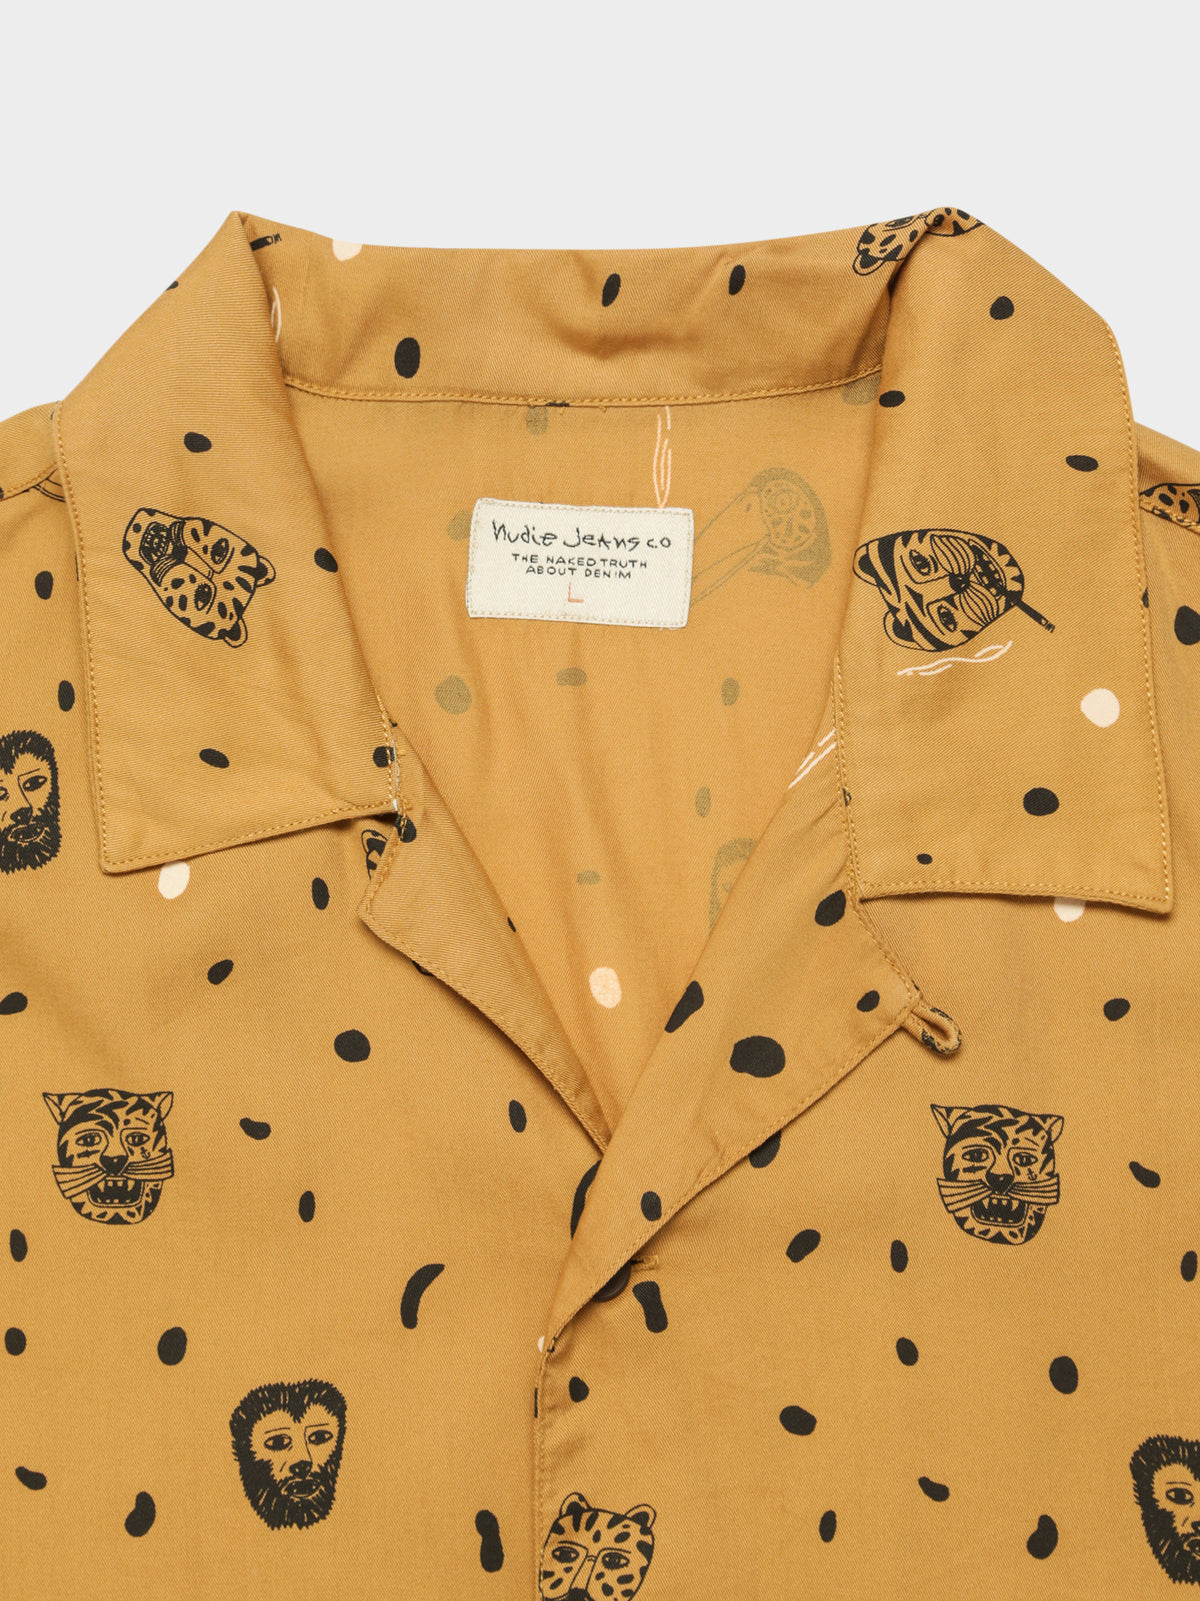 Arvid Misfit Creatures Shirt in Camel